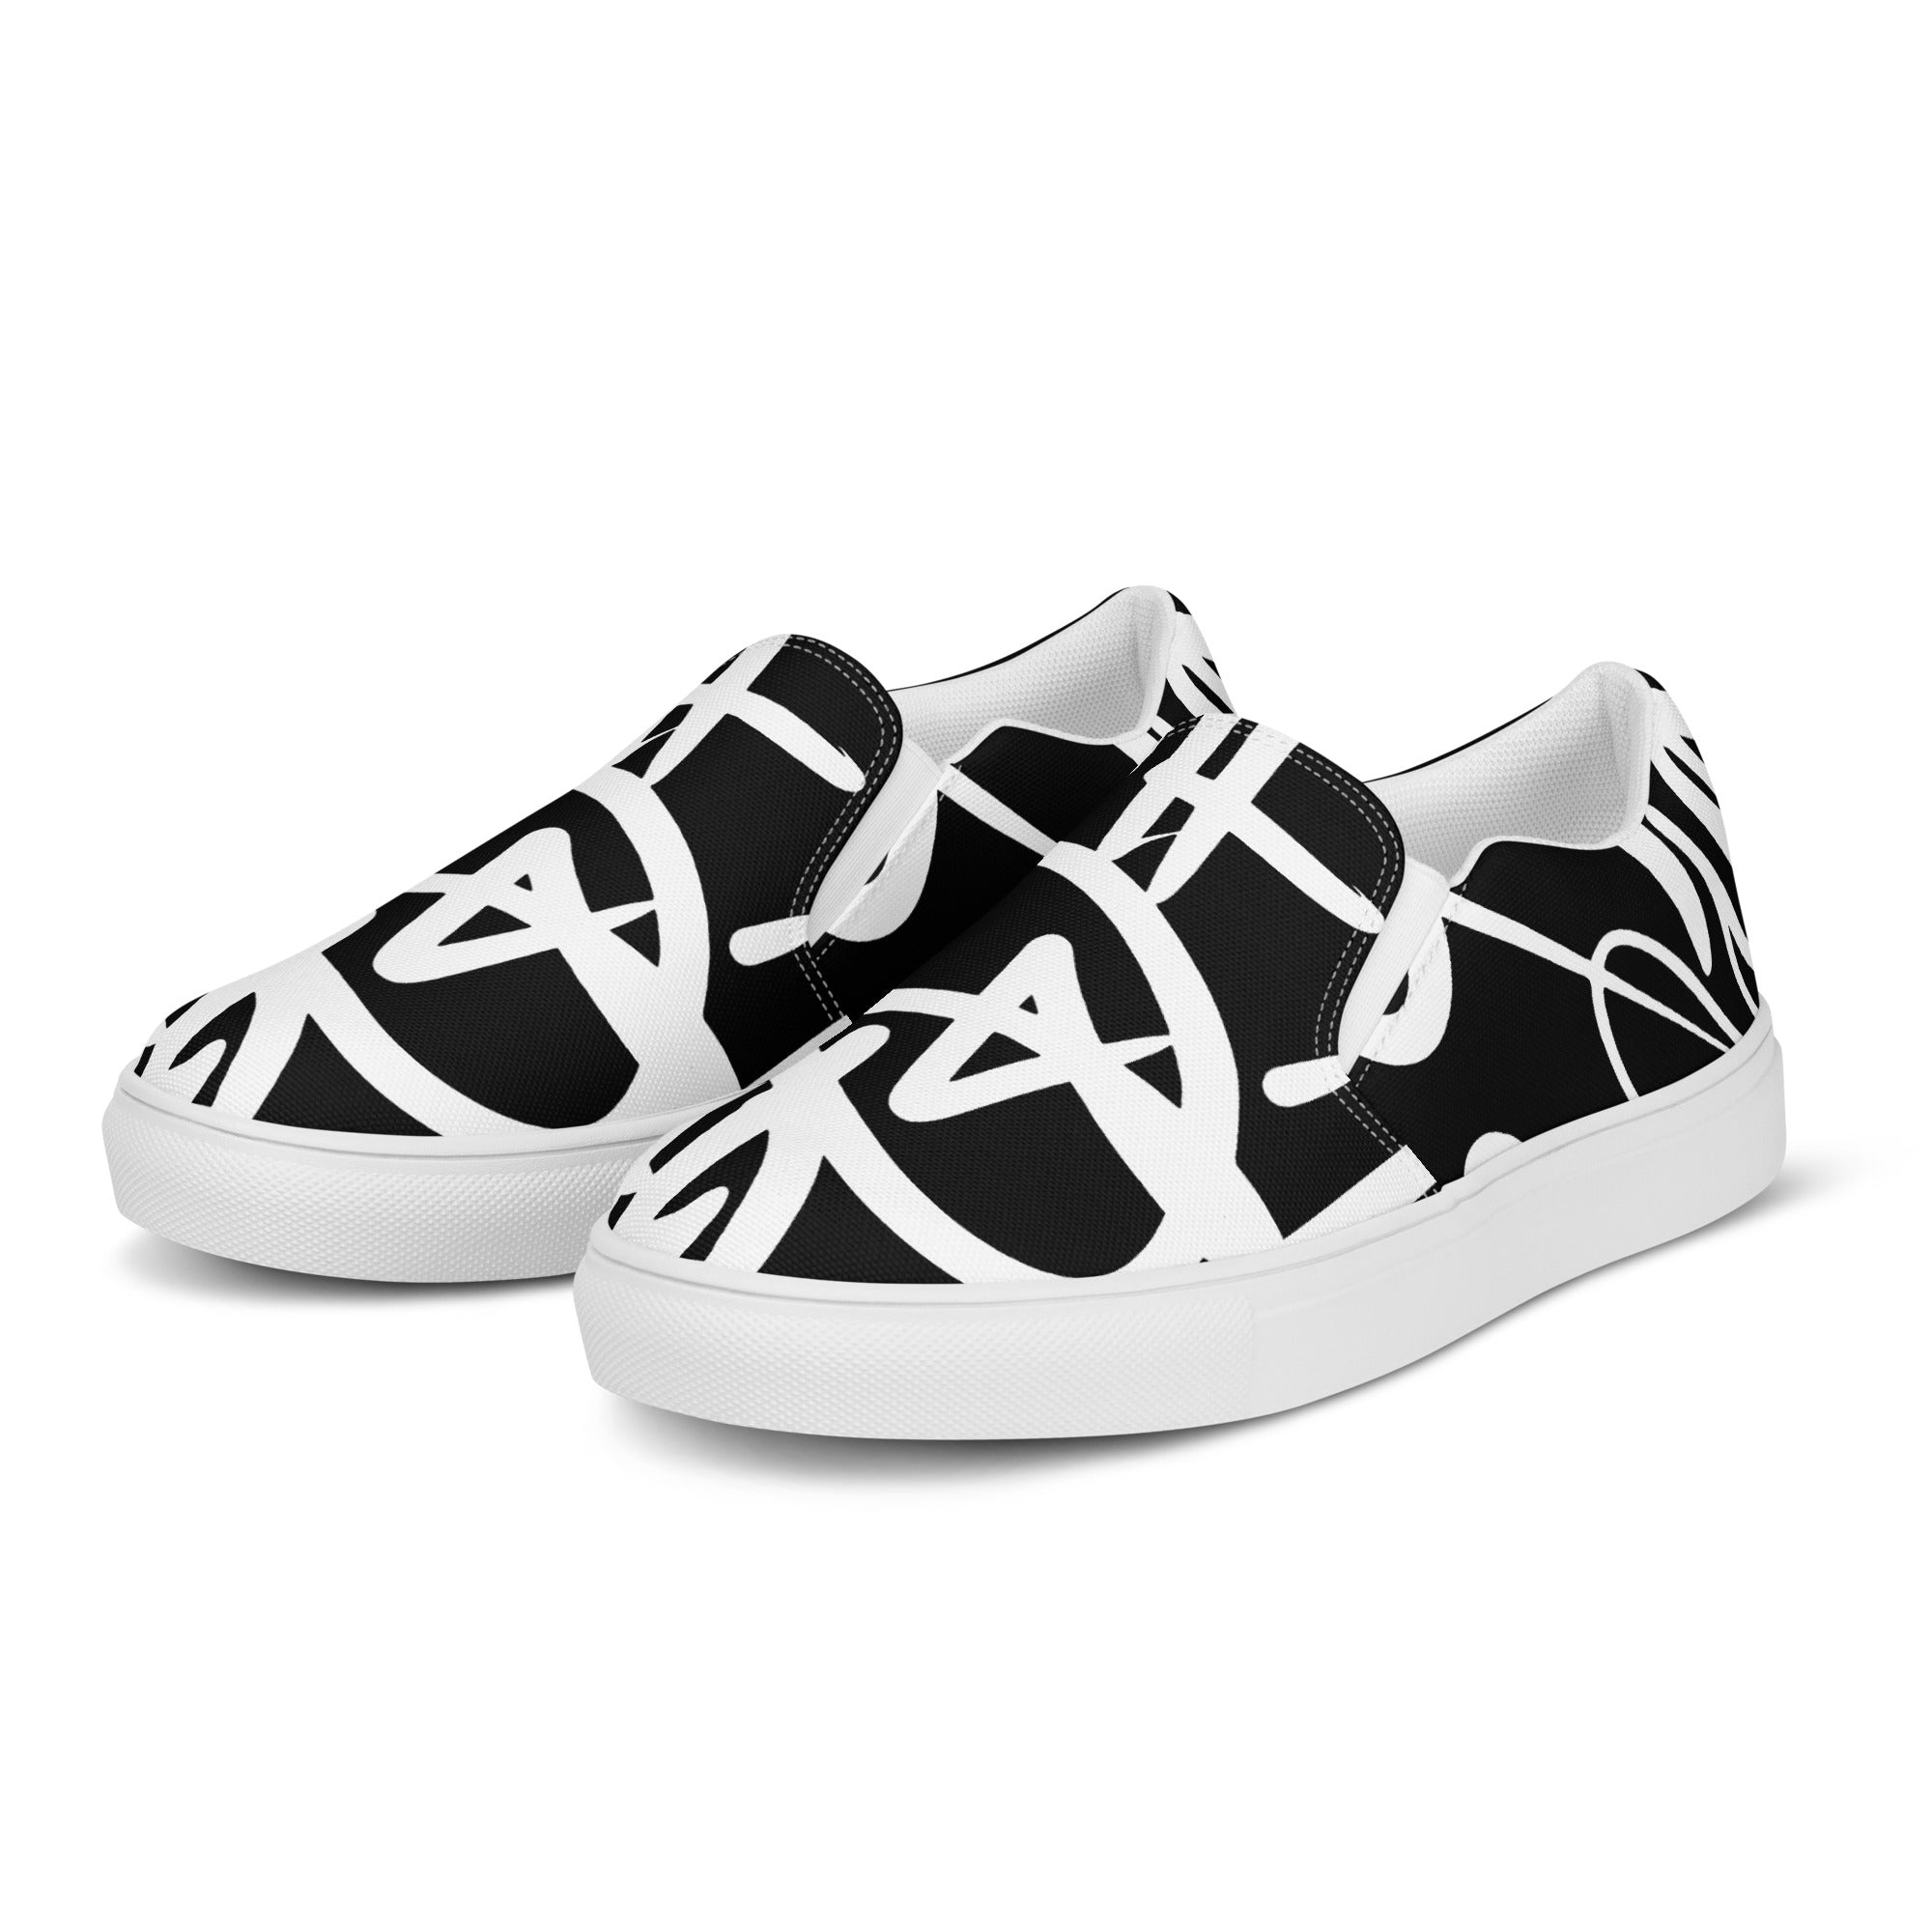 Women’s SLSY slip-on canvas shoes